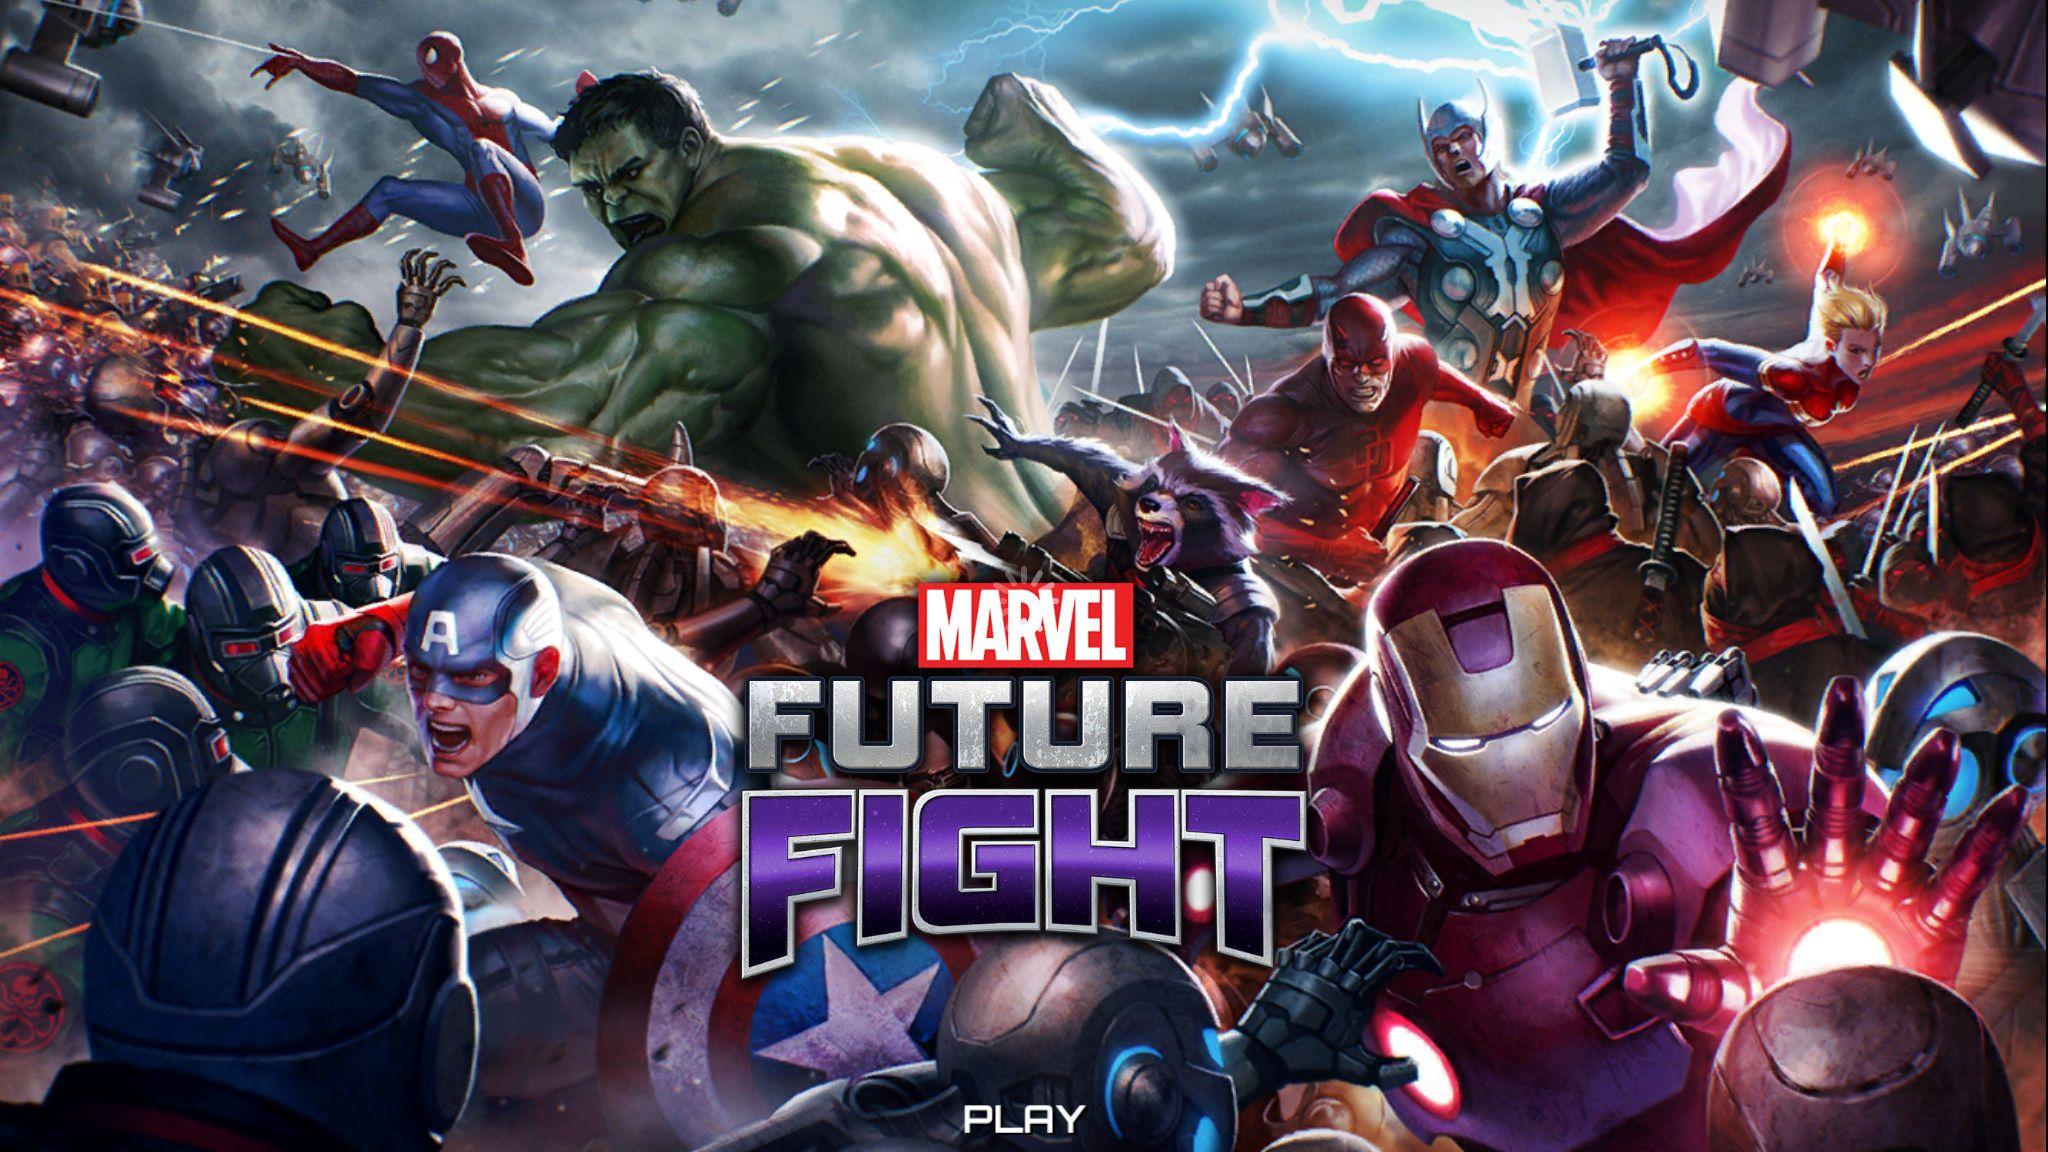 4K Marvel Future Fight 2020 Wallpapers